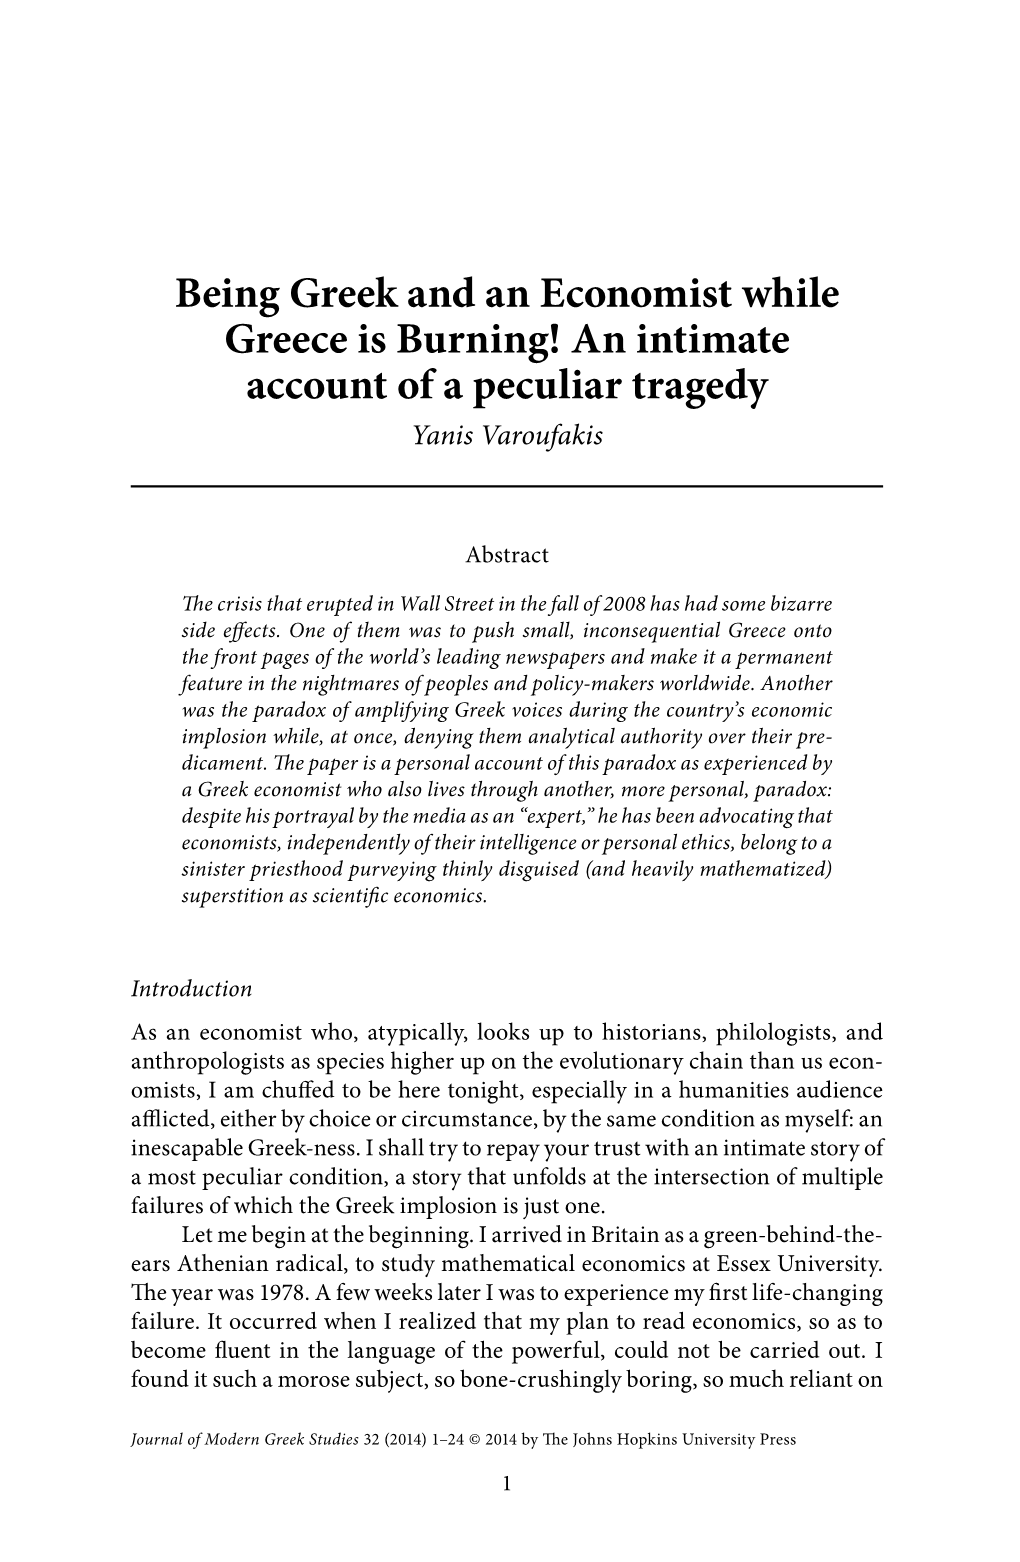 Being Greek and an Economist While Greece Is Burning! an Intimate Account of a Peculiar Tragedy Yanis Varoufakis